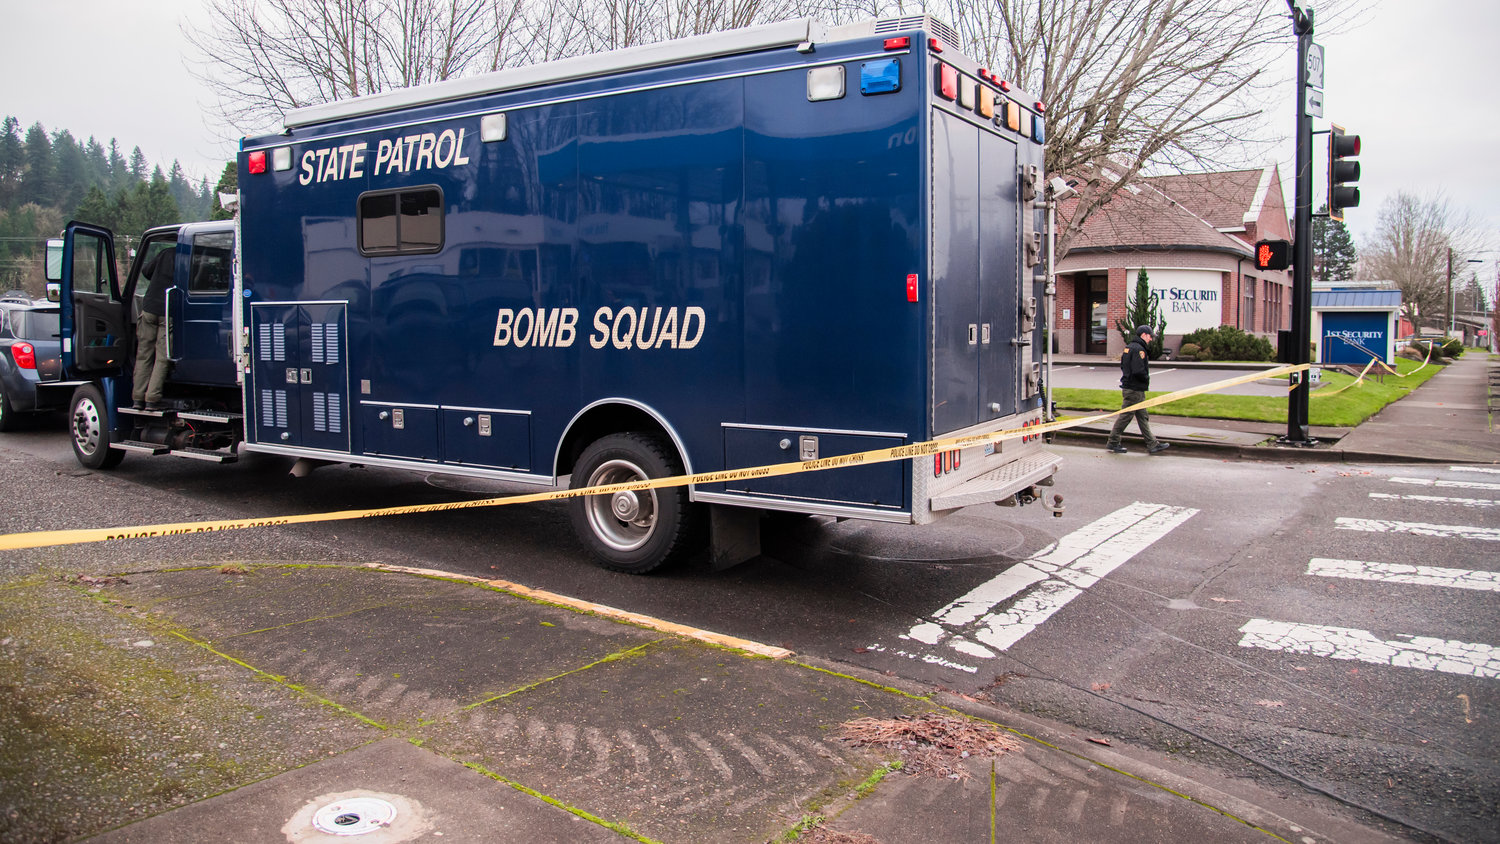 The Washington State Patrol Bomb Squard arrives on the scene at the 1st Security Bank location at 604 South Tower Avenue in Centralia after reports of an explosion in the area last month.